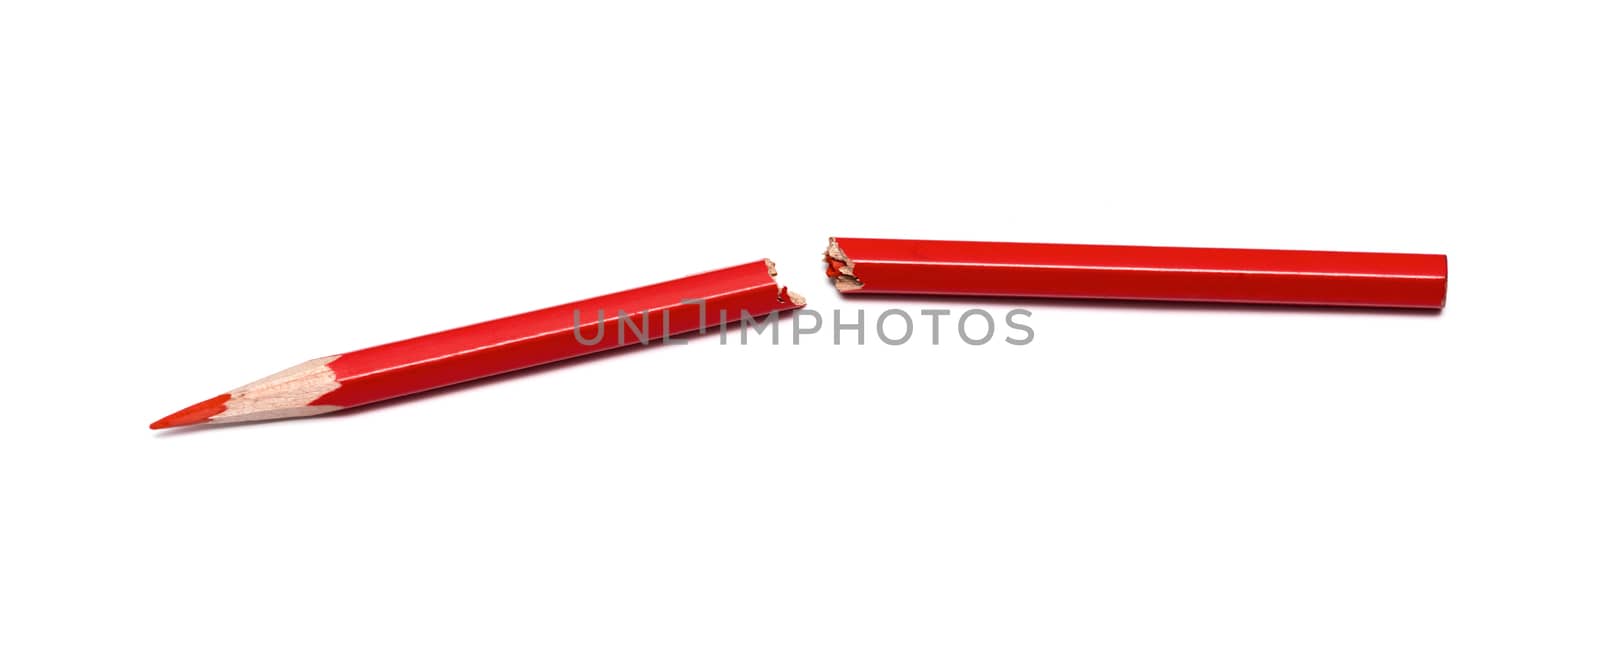 broken red pencil on a white background